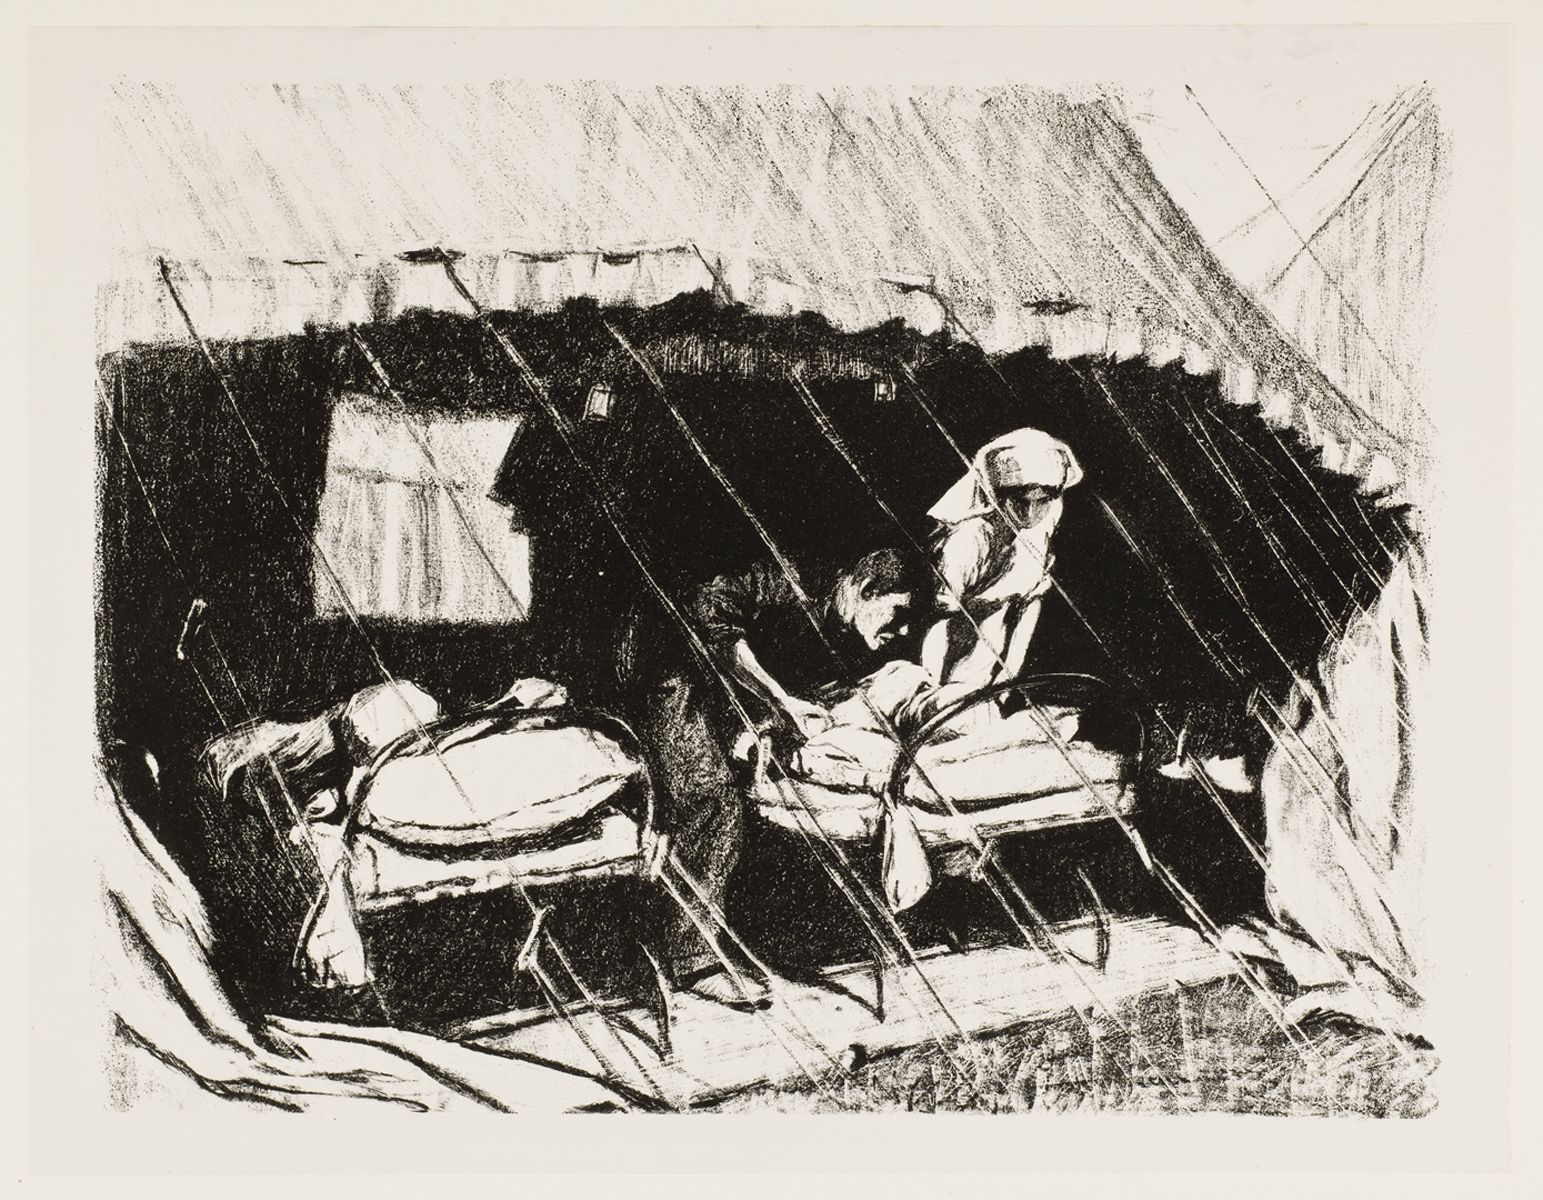 Casualty Clearing Station in France - Claude Shepperson